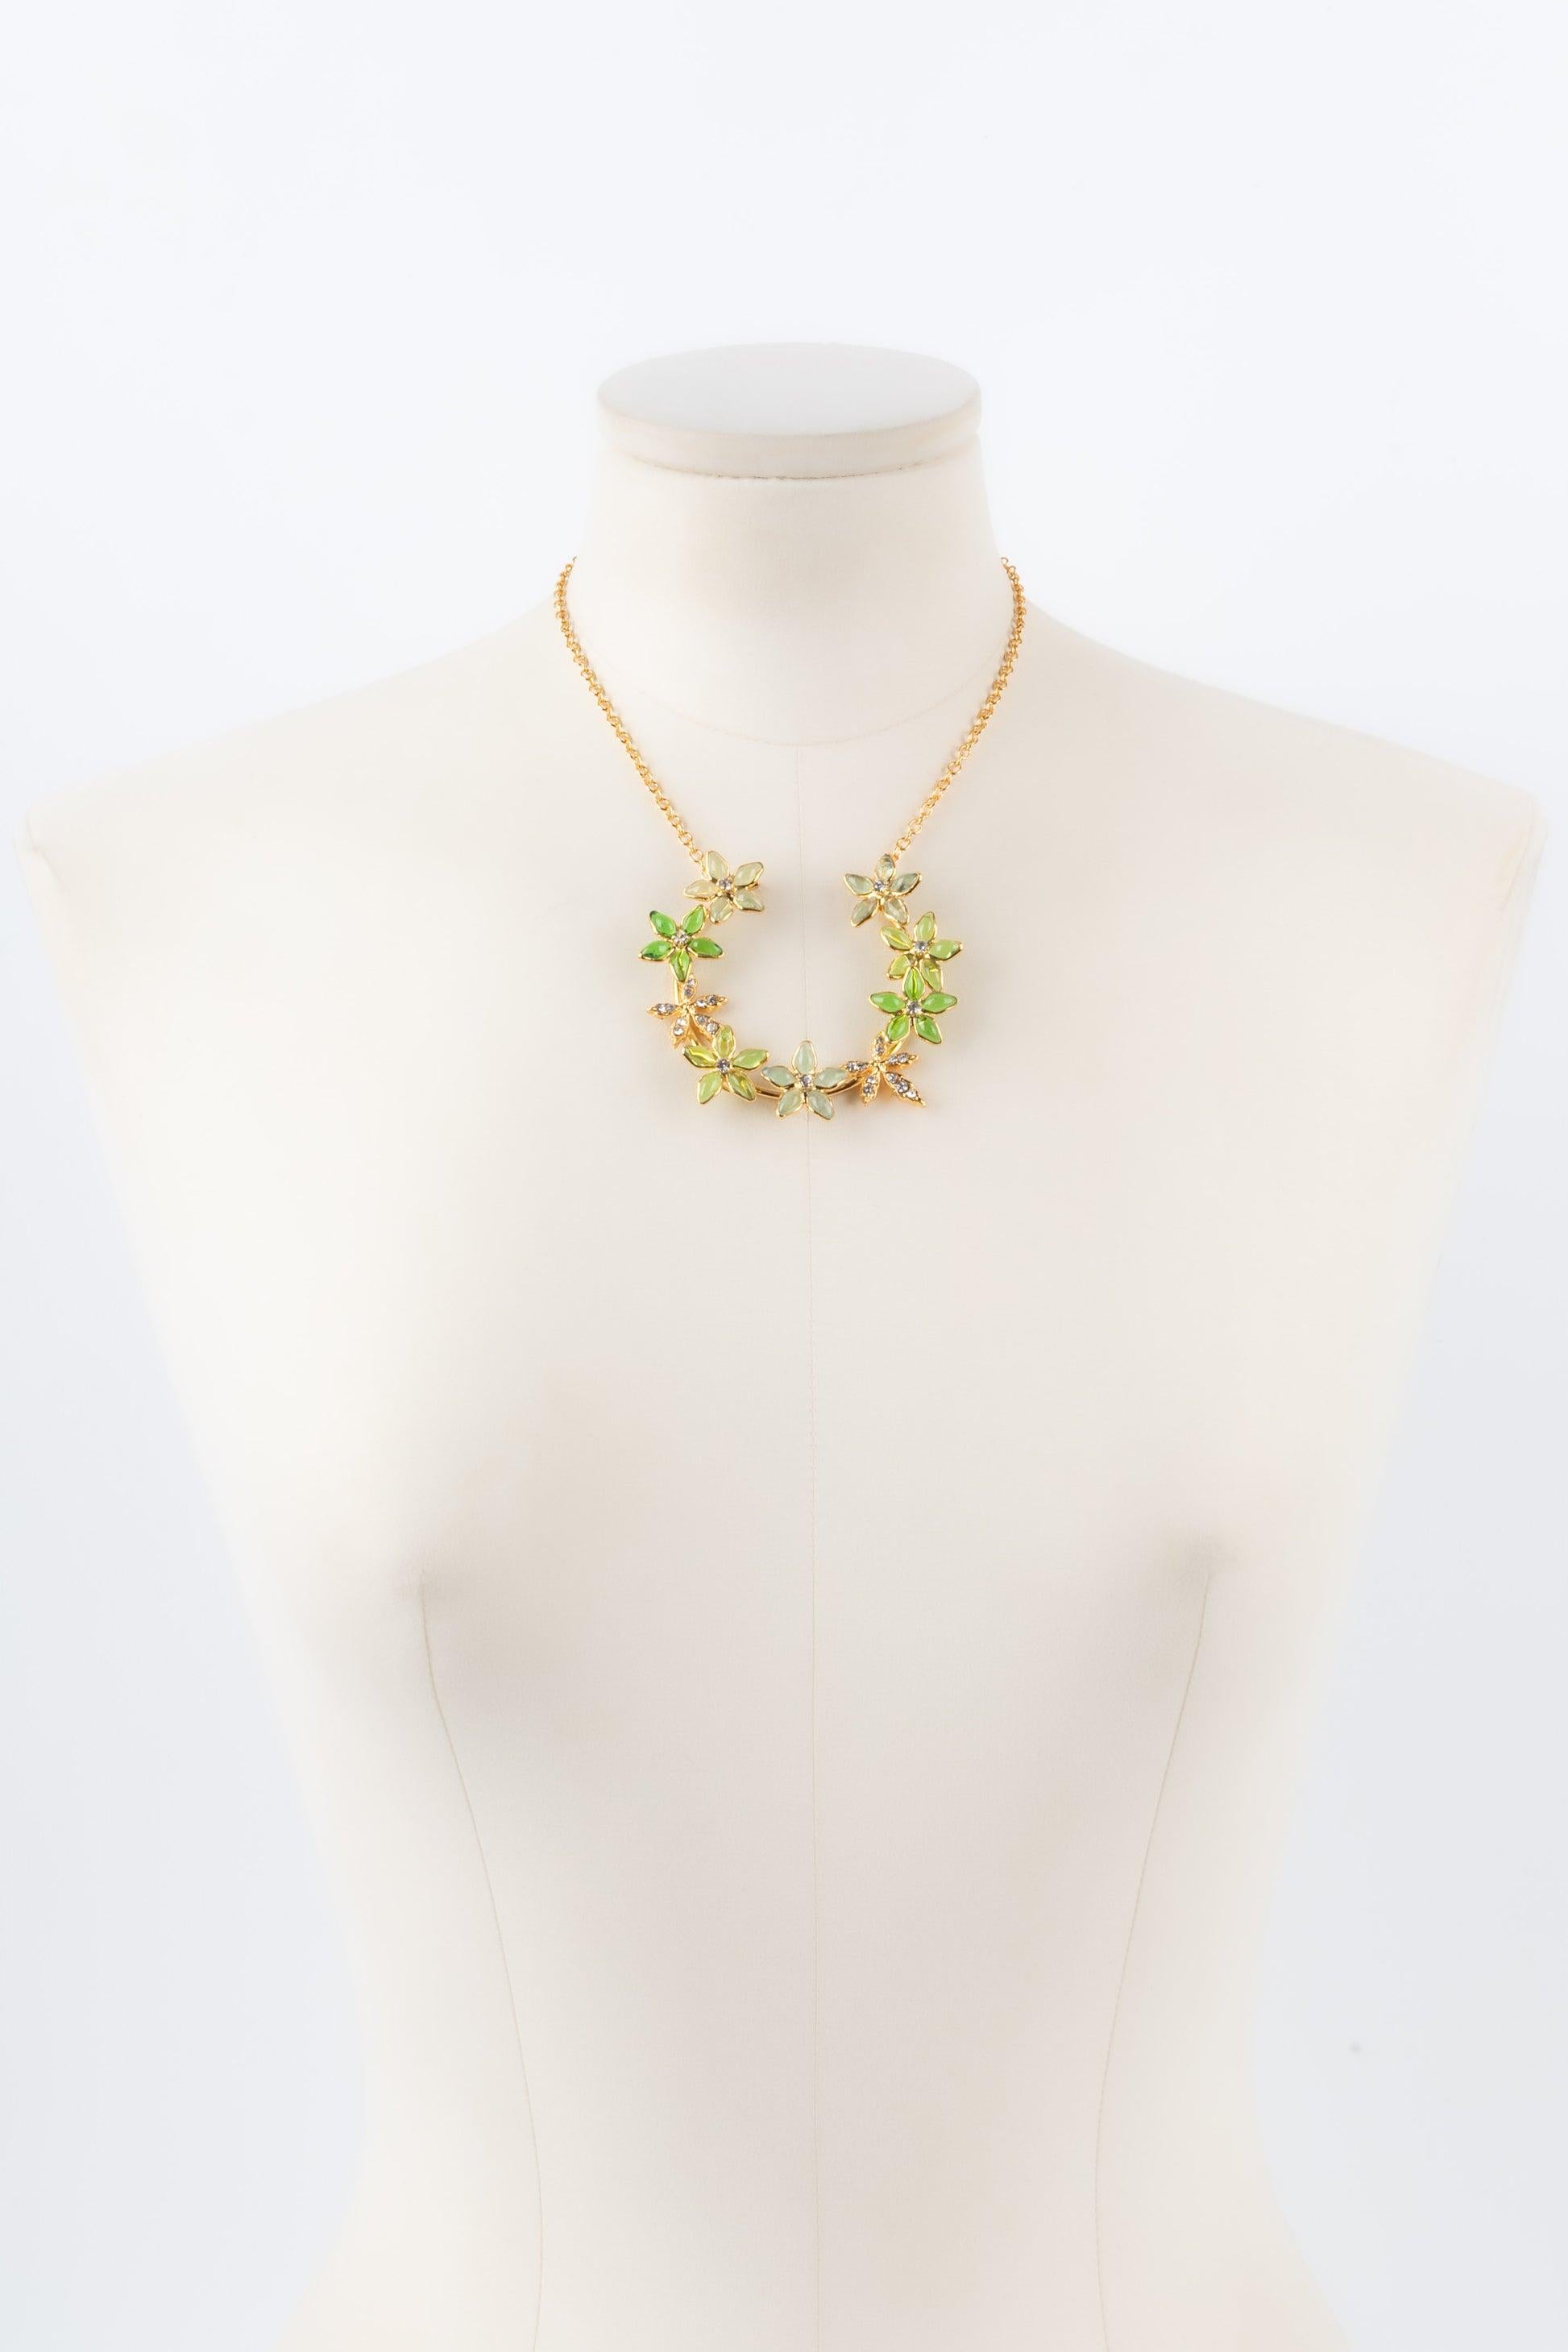 Augustine - Golden metal necklace with rhinestones and glass paste in green tones.

Additional information:
Condition: Very good condition
Dimensions: Length: 38 cm to 43 cm

Seller Reference: BC232